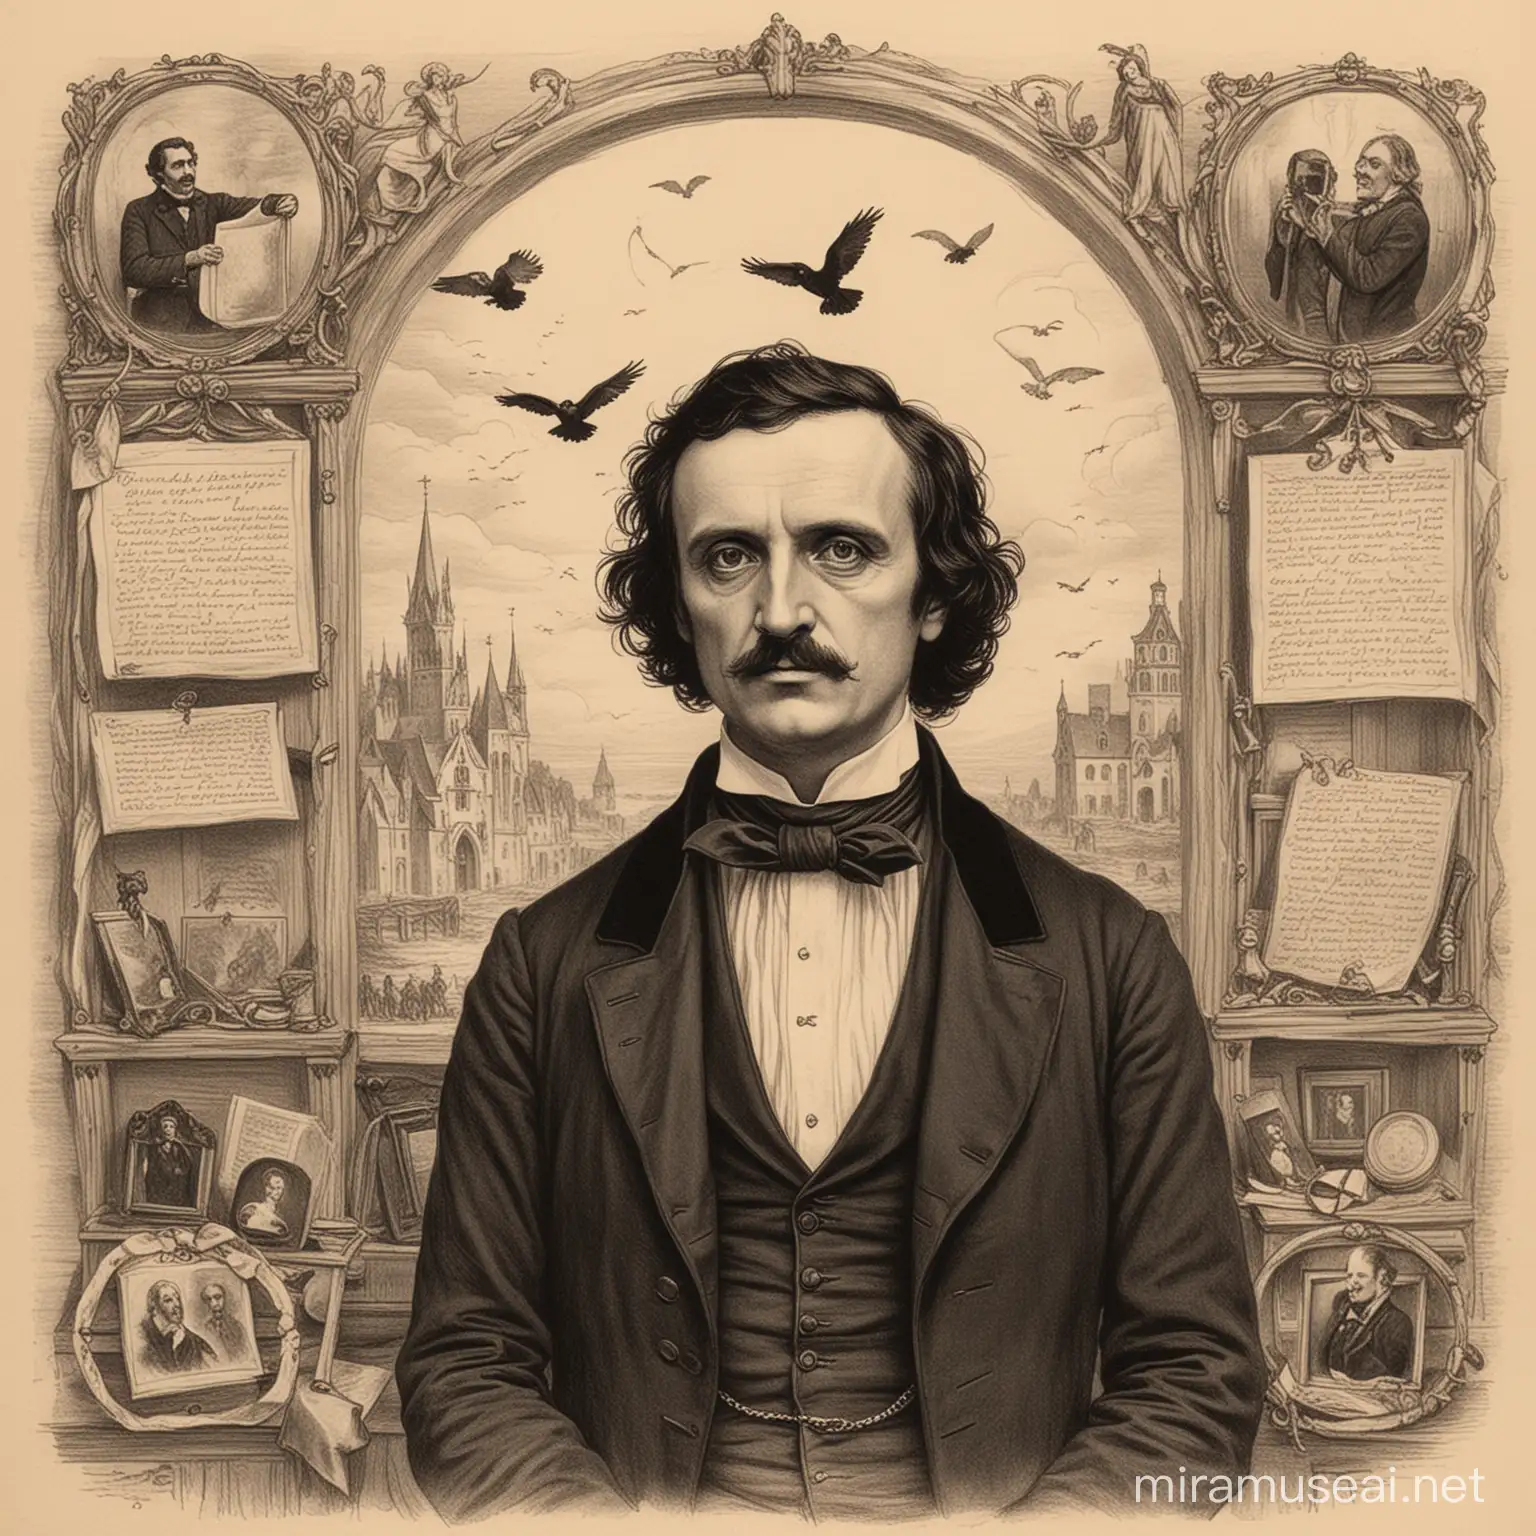 Edgar Allan Poe Depiction of His Life and Literary Works